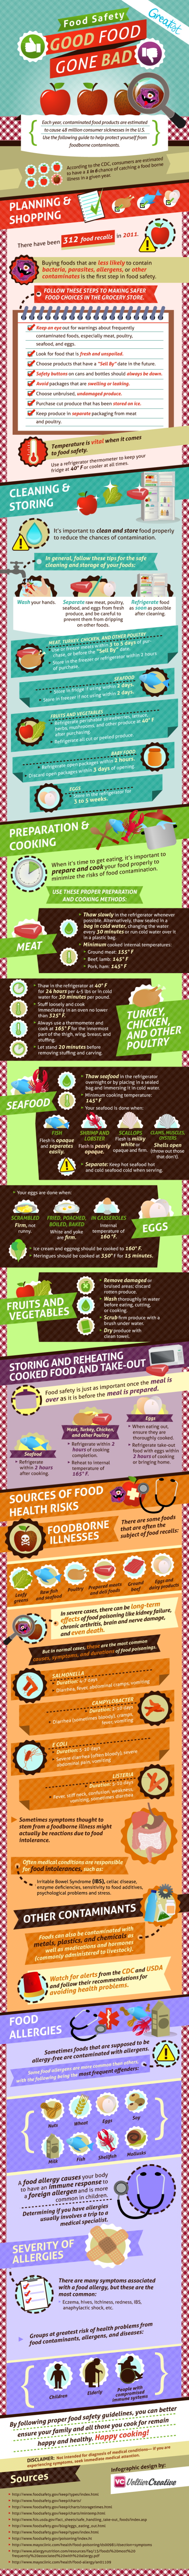 Food-Safety-Infographic